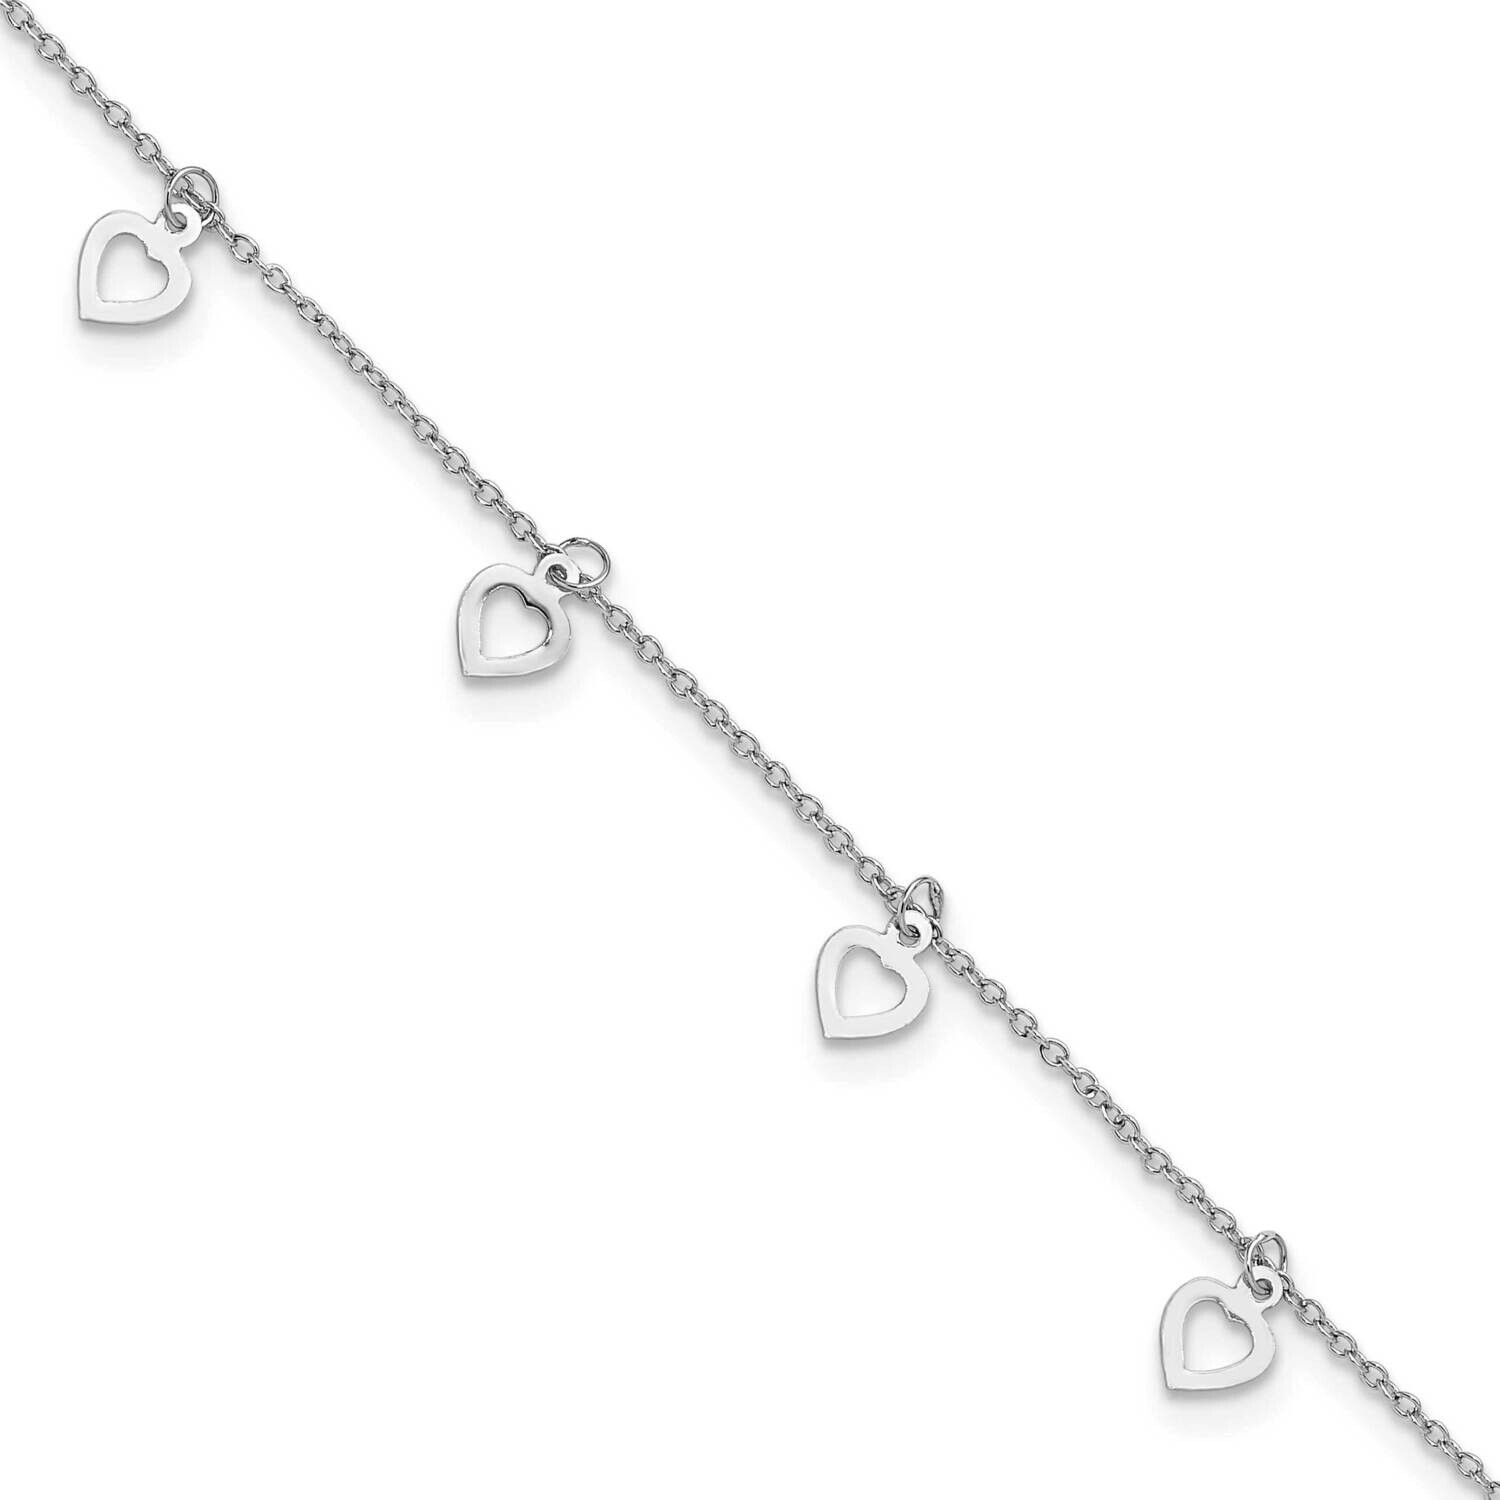 Polished Heart 9.5 Inch Plus 1 Inch Extender Anklet Sterling Silver Rhodium-Plated QG6284-9.5